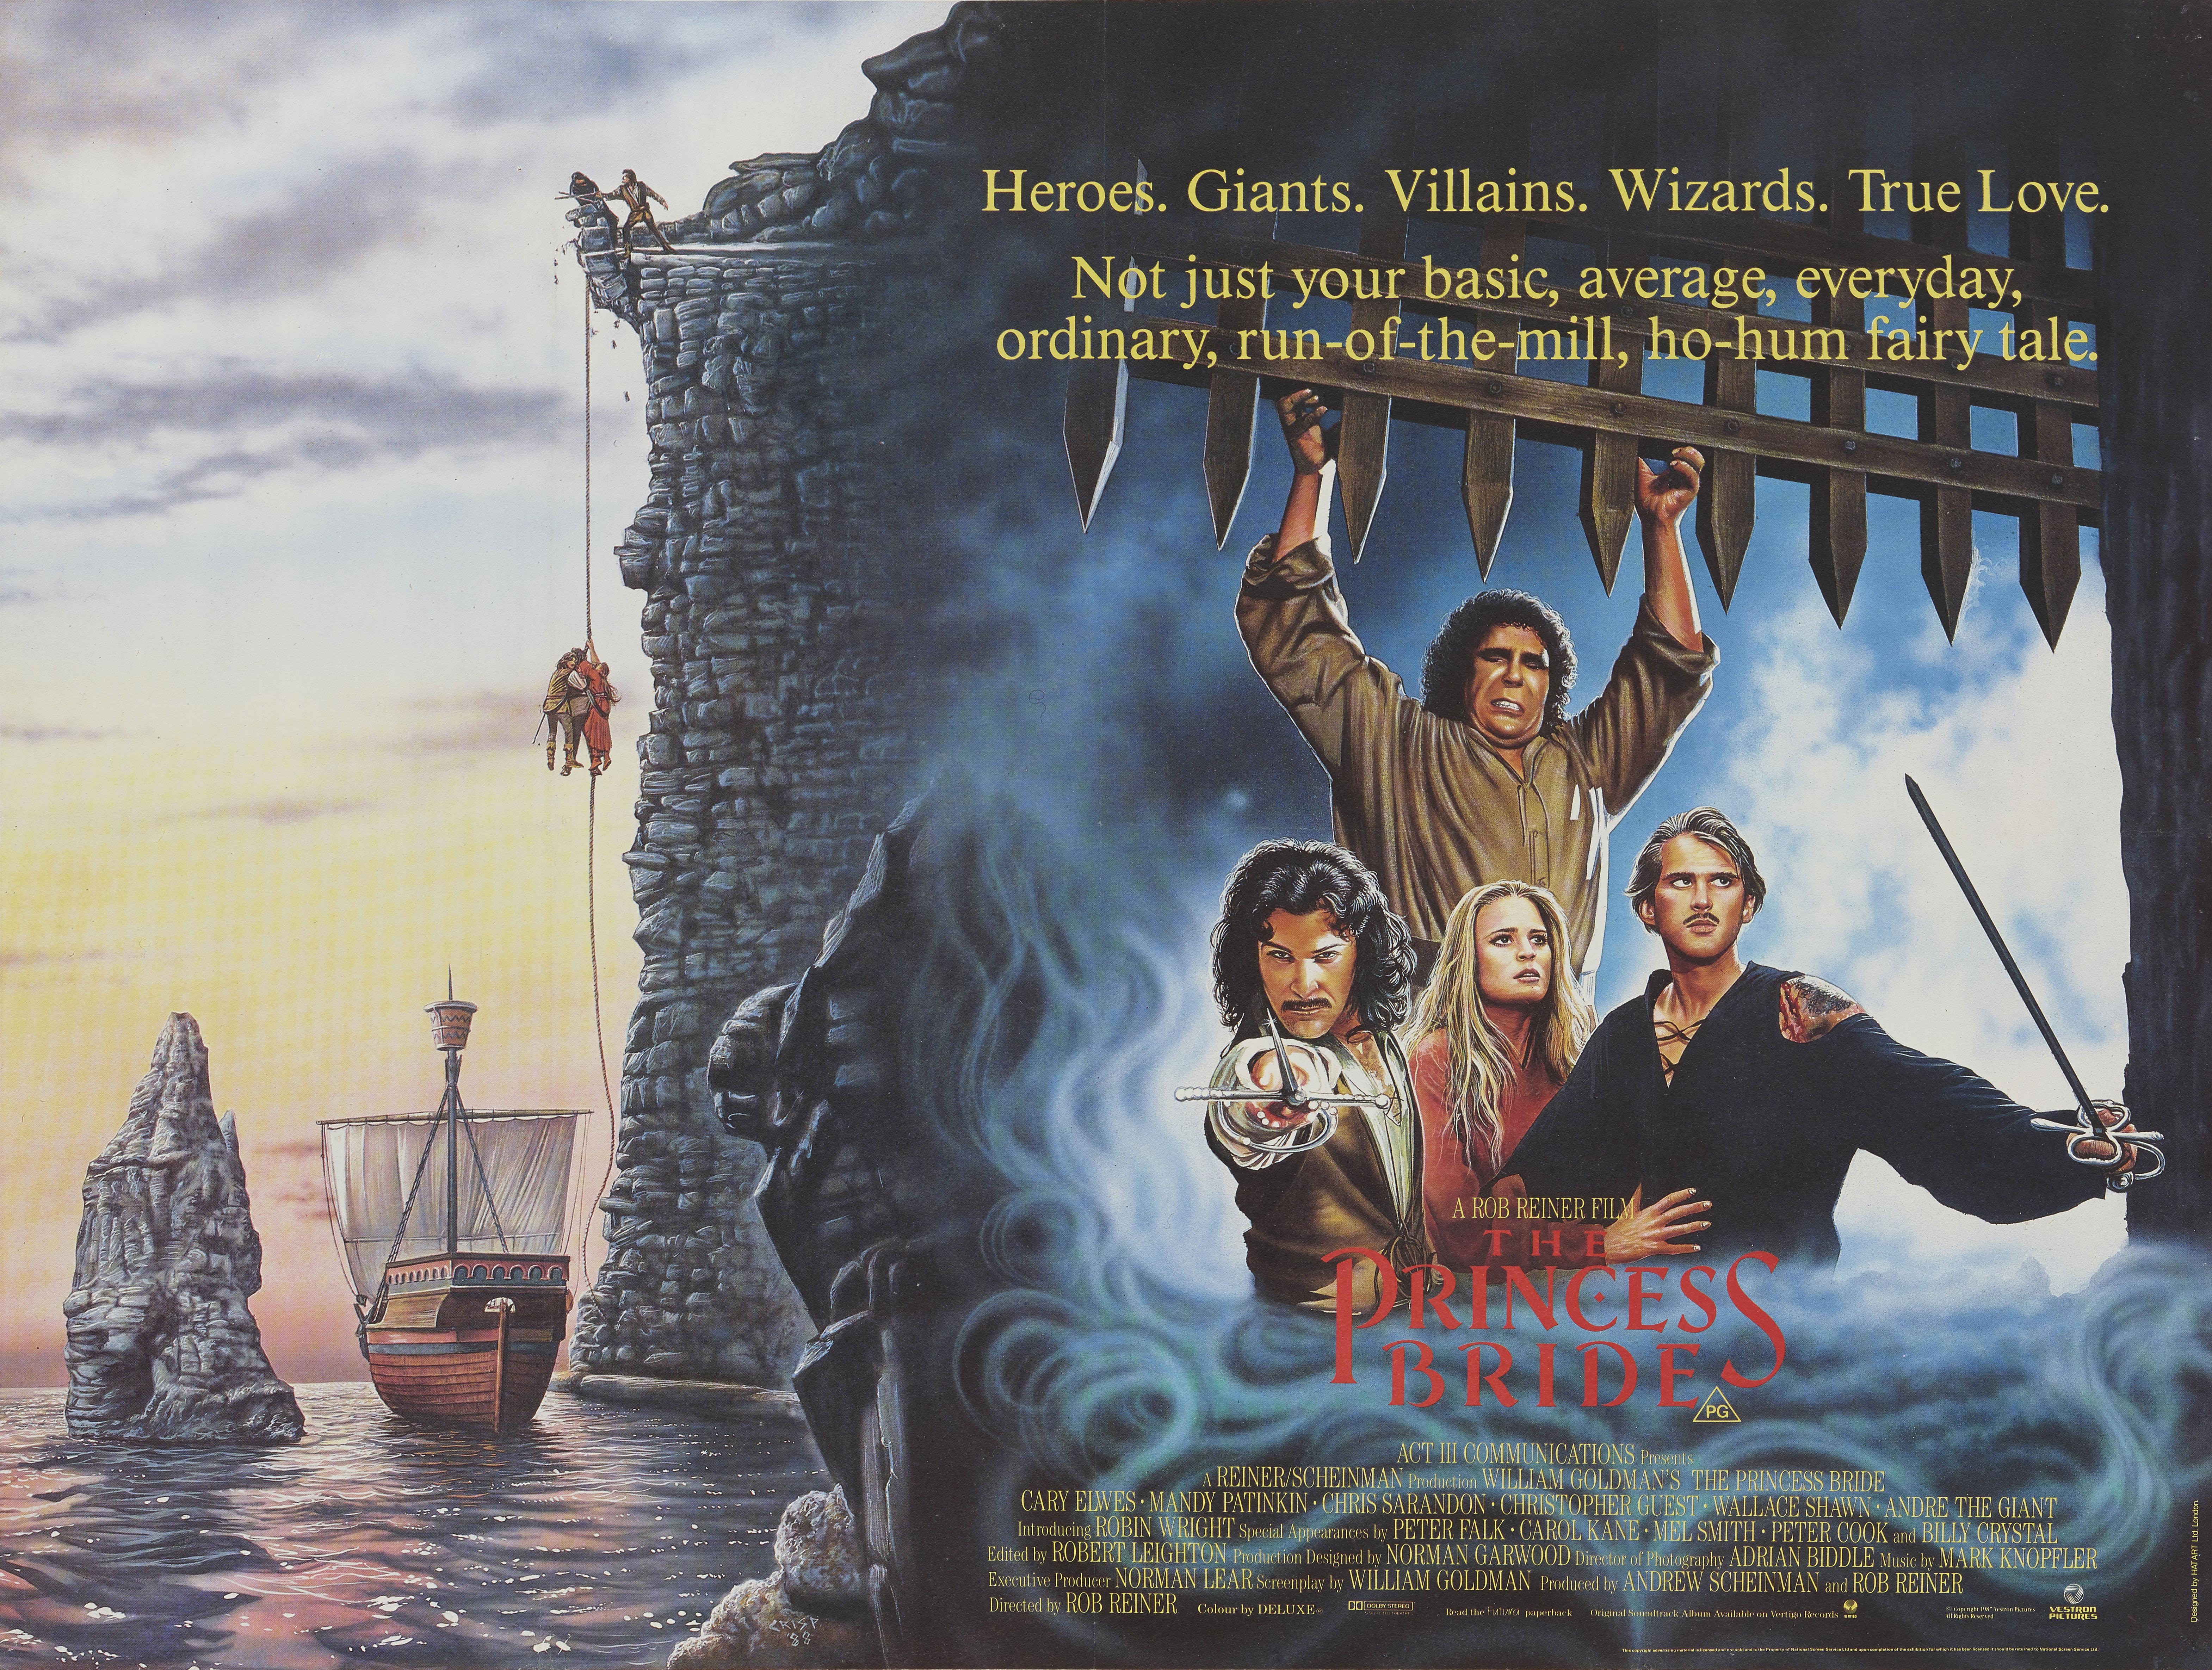 Original British film poster for 1987 fantasy adventure film The Princess Bride.
The film was directed by Rob Reiner and starred Cary Elwes, Mandy Patinkin, Robin Wright
This poster has been conservation linen backed and would be shipped rolled in